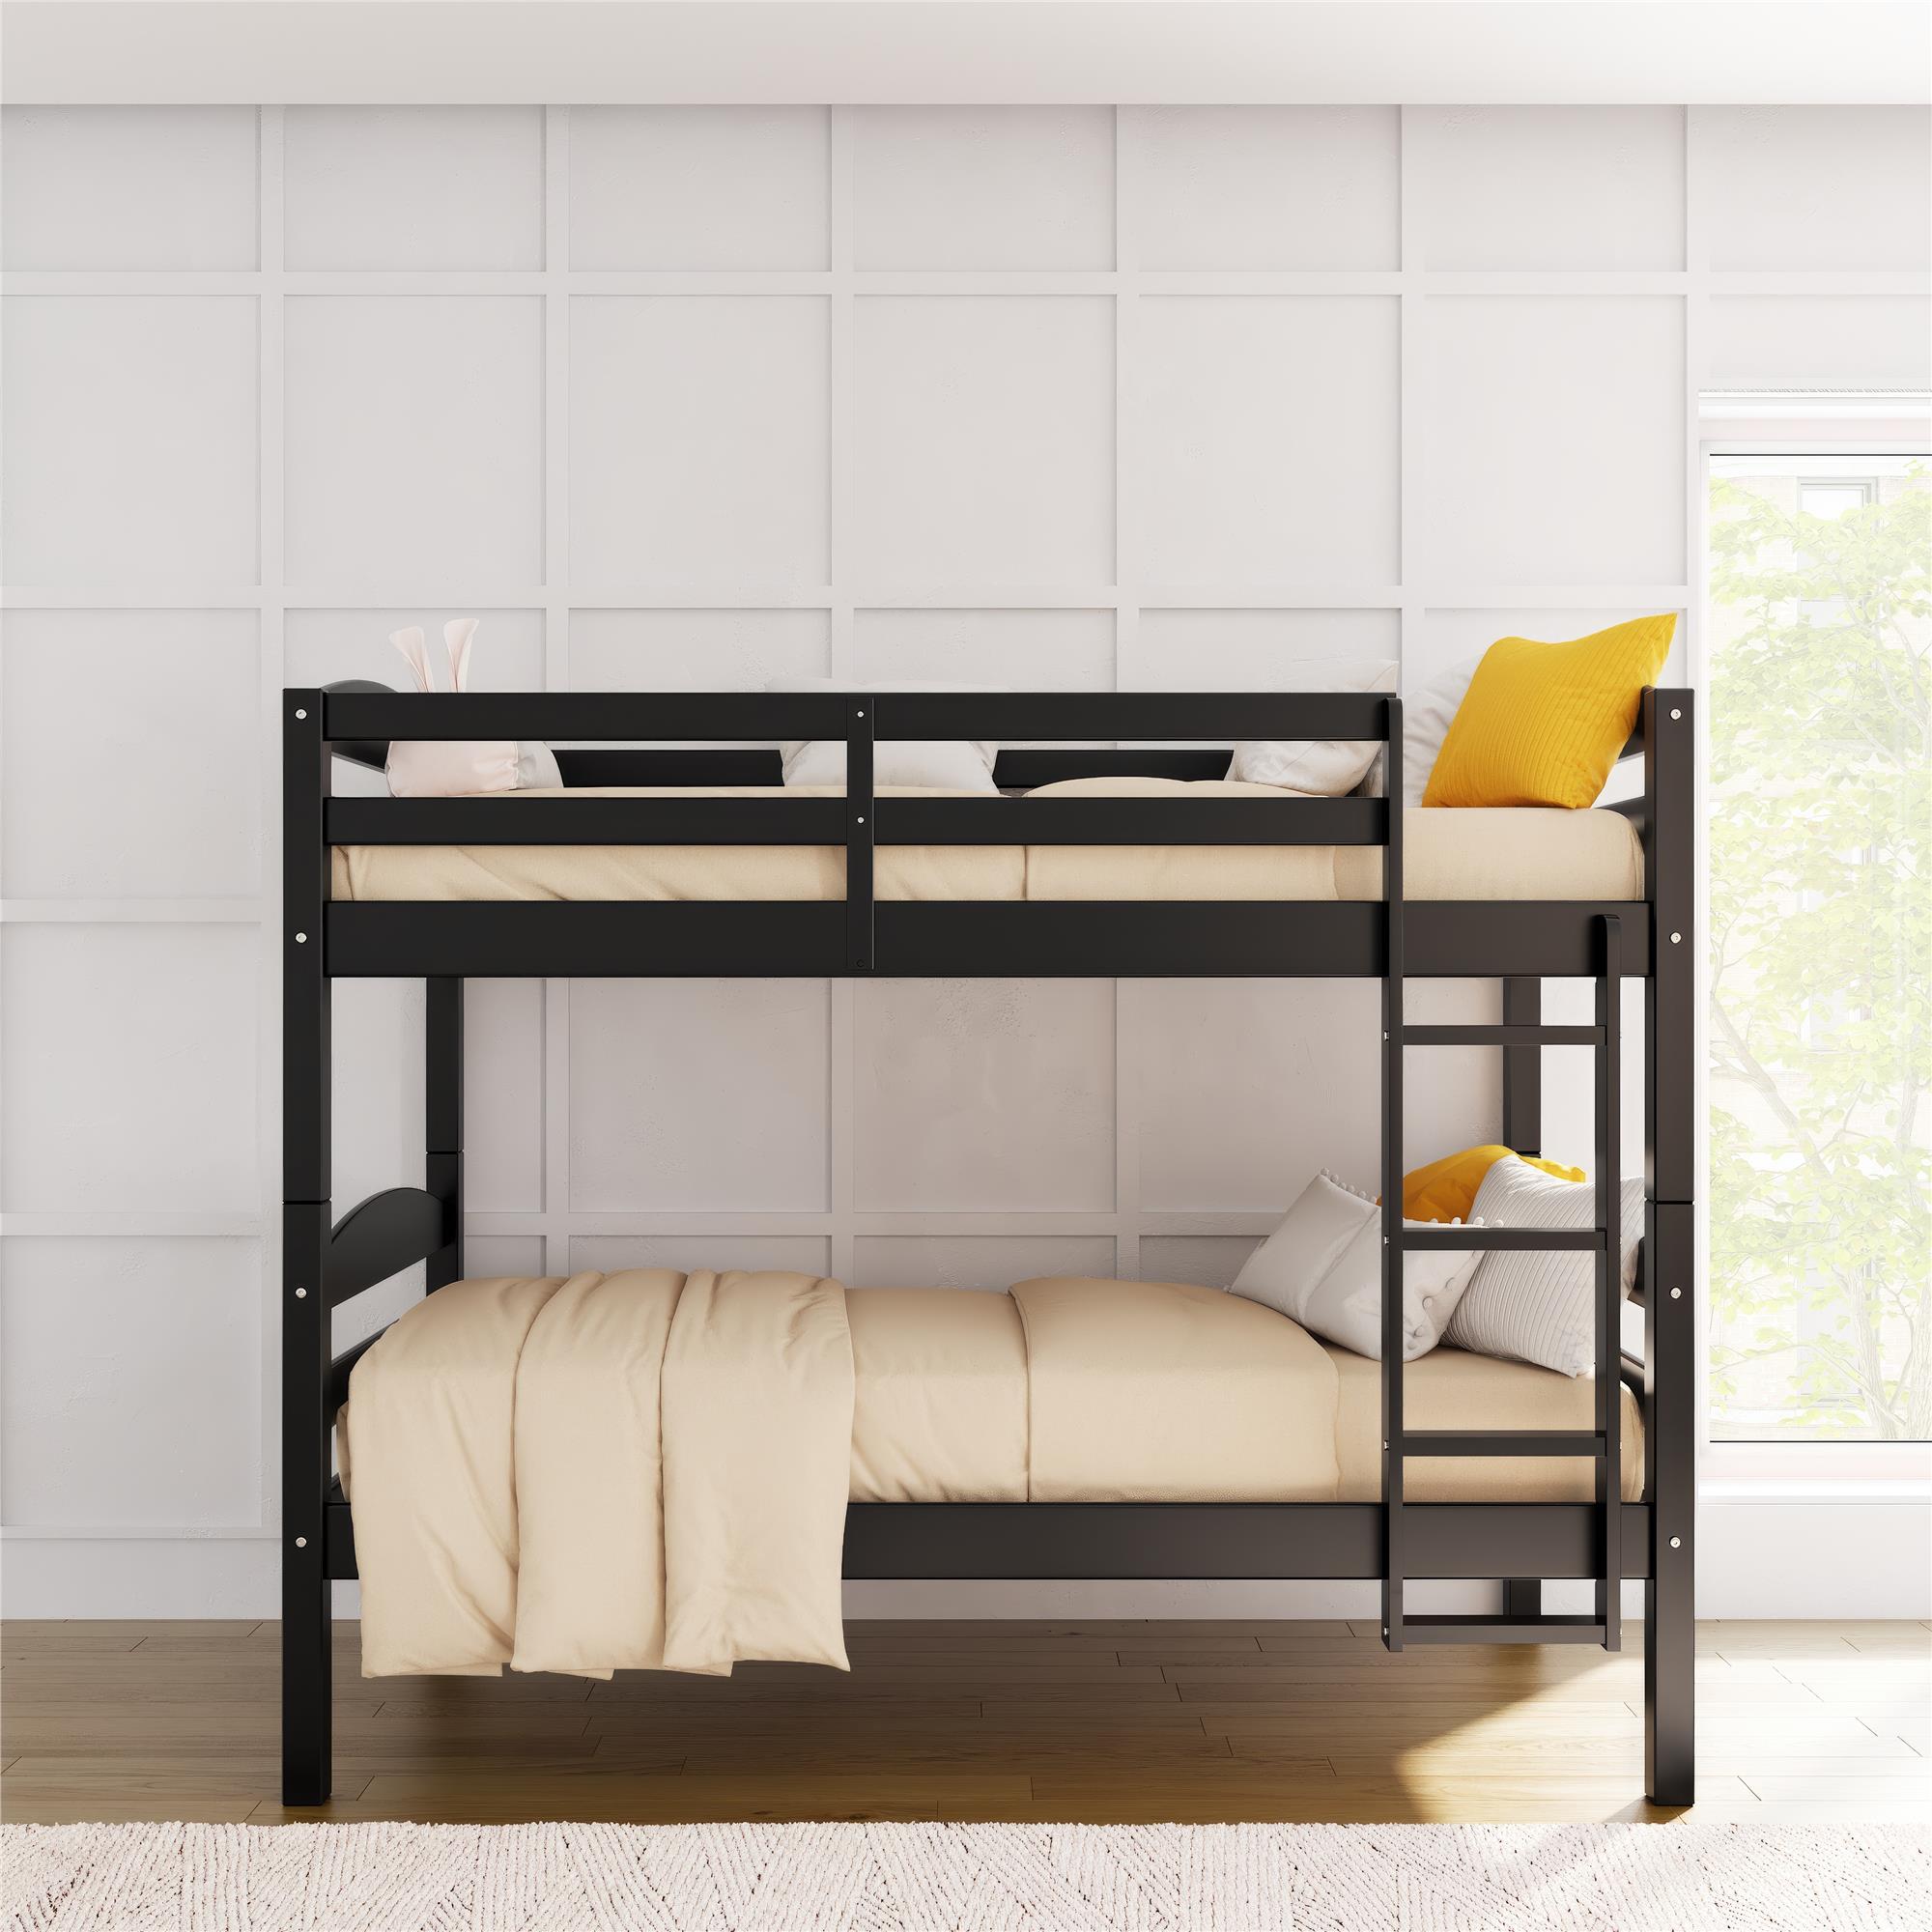 Better Homes & Gardens Leighton Kids Solid Wood Twin-over-Twin Convertible Bunk Bed with Ladder and Guardrails, Black - image 3 of 11